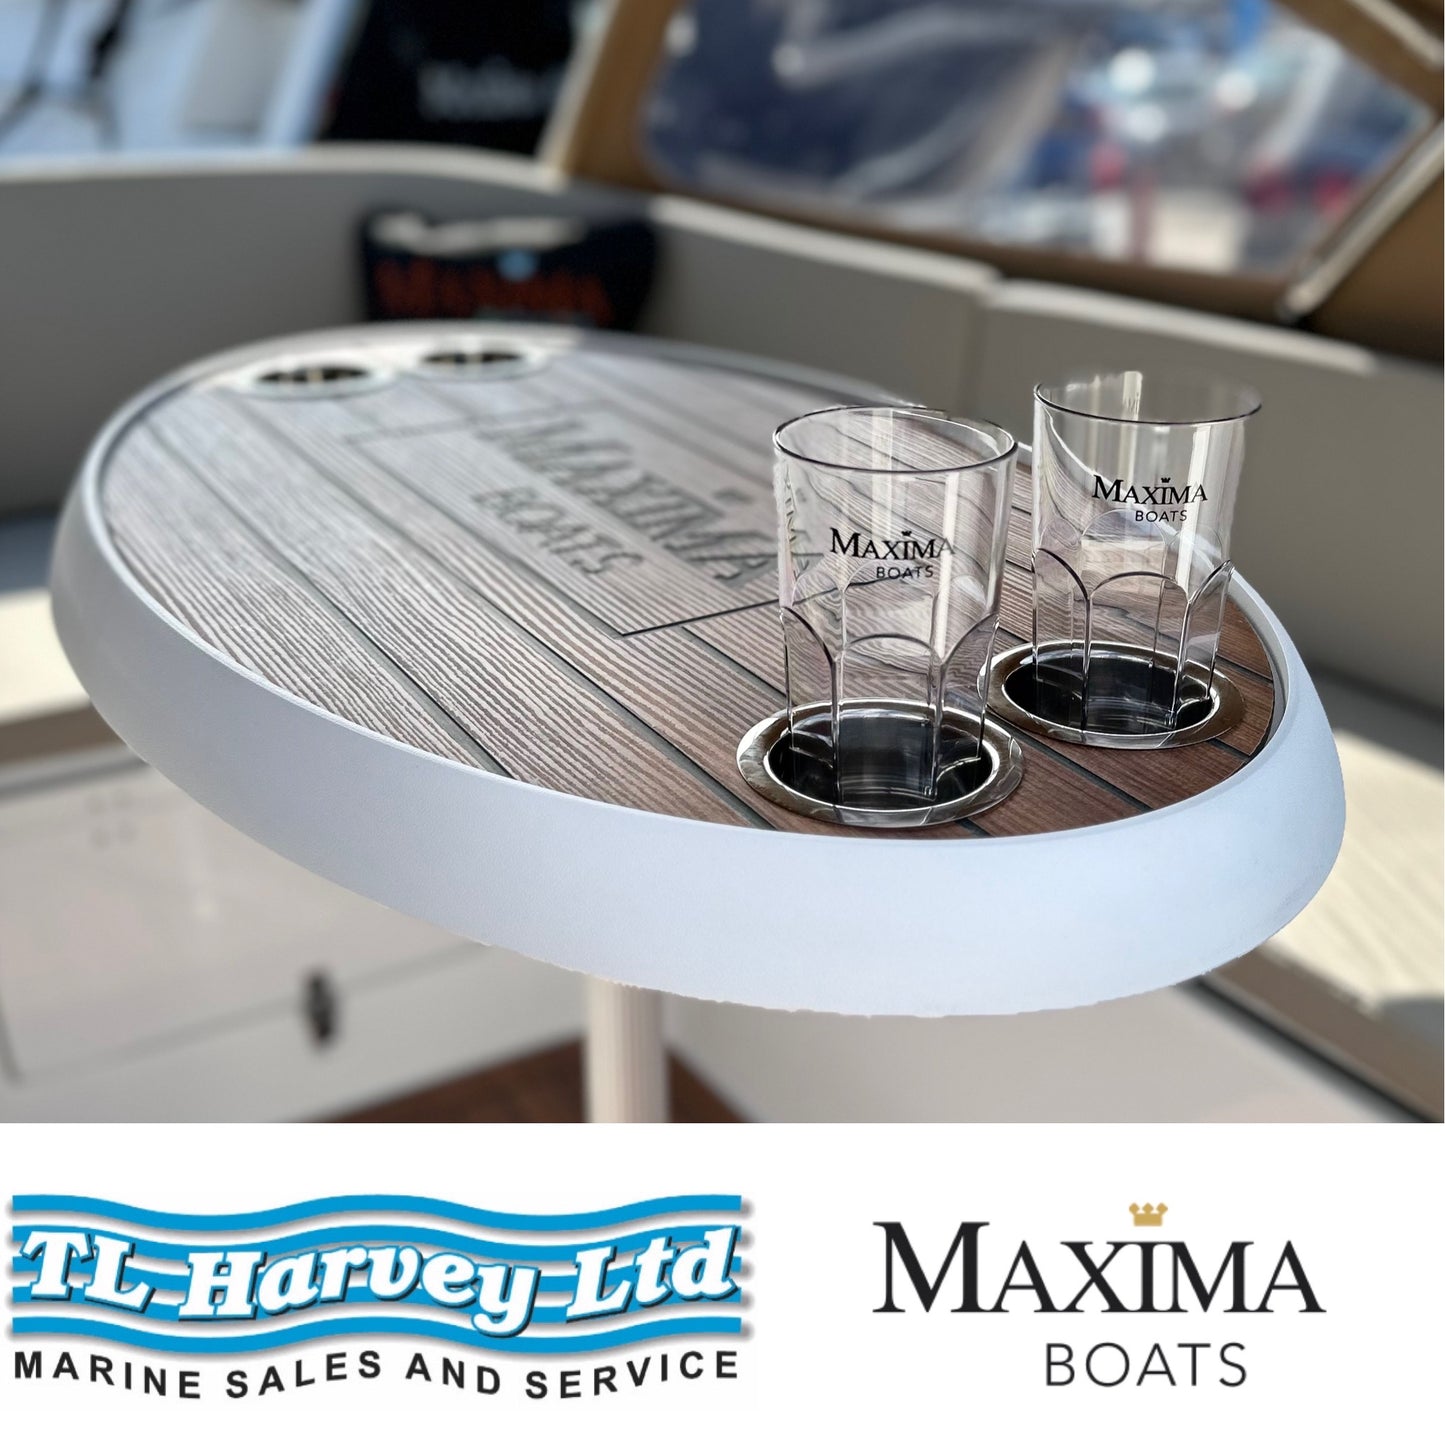 Maxima 550 Boat powered by Honda BF50 50hp In Stock Now